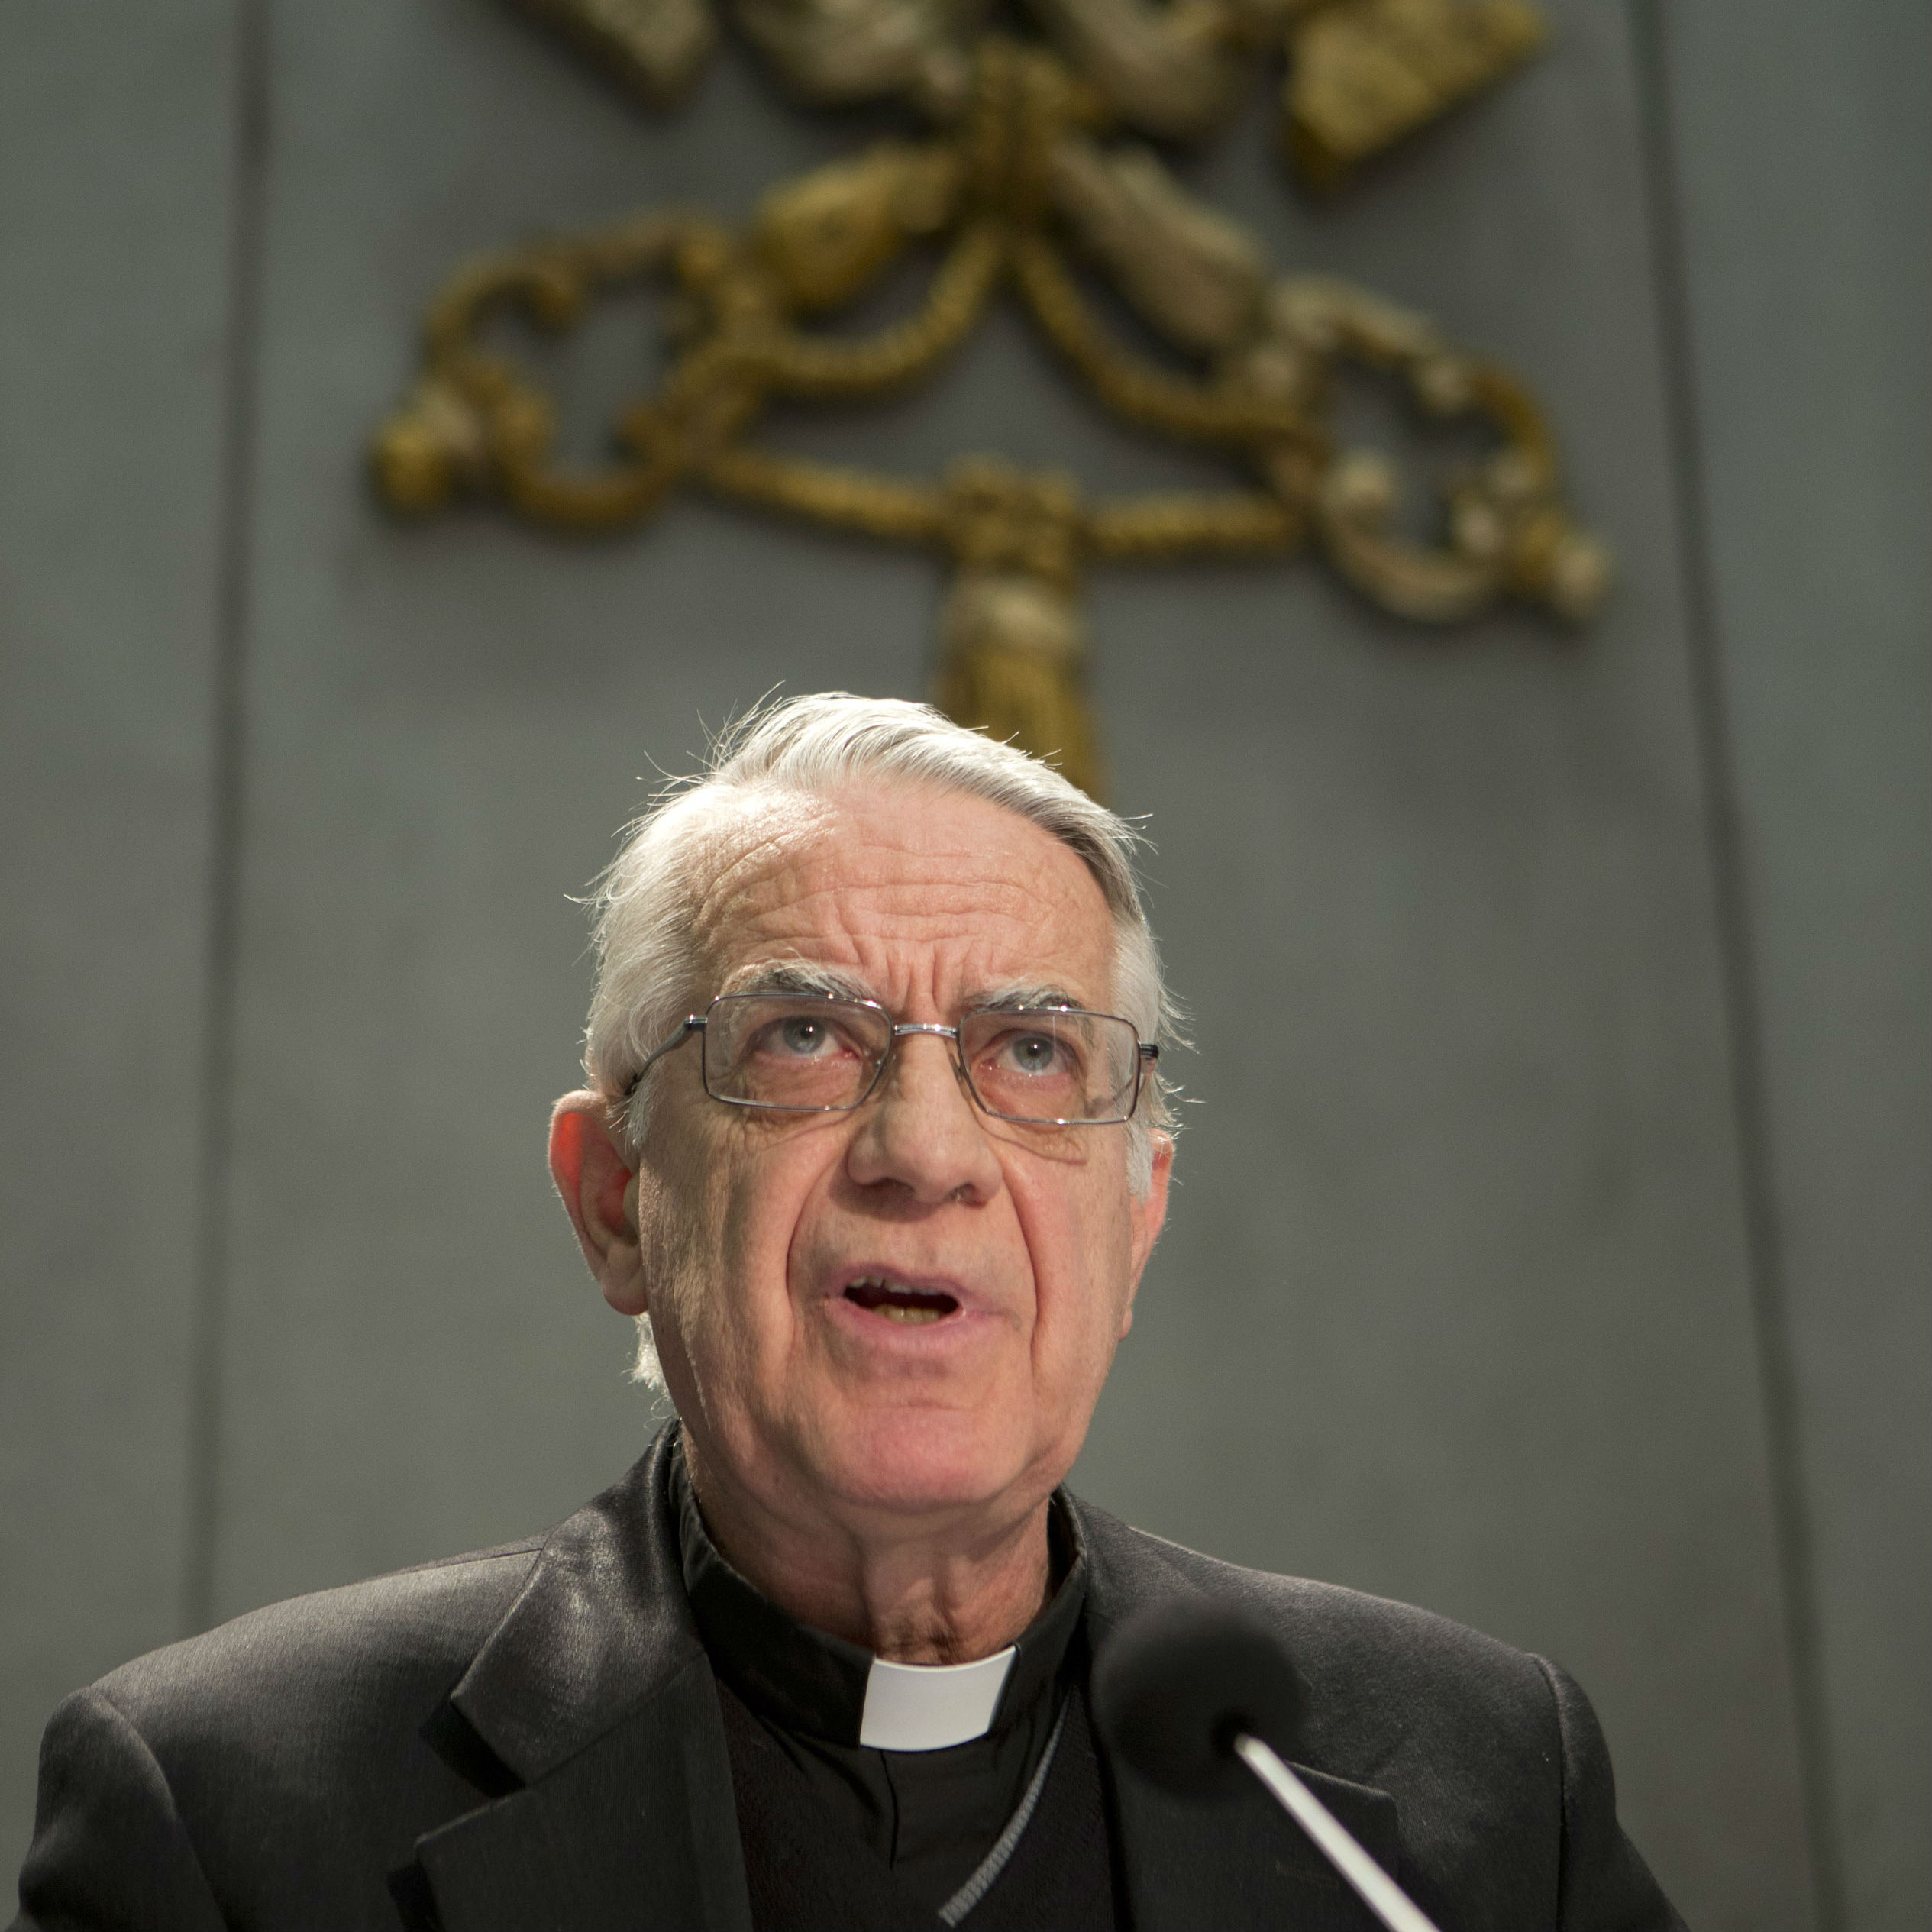 Vatican bank supervisors step down over management differences